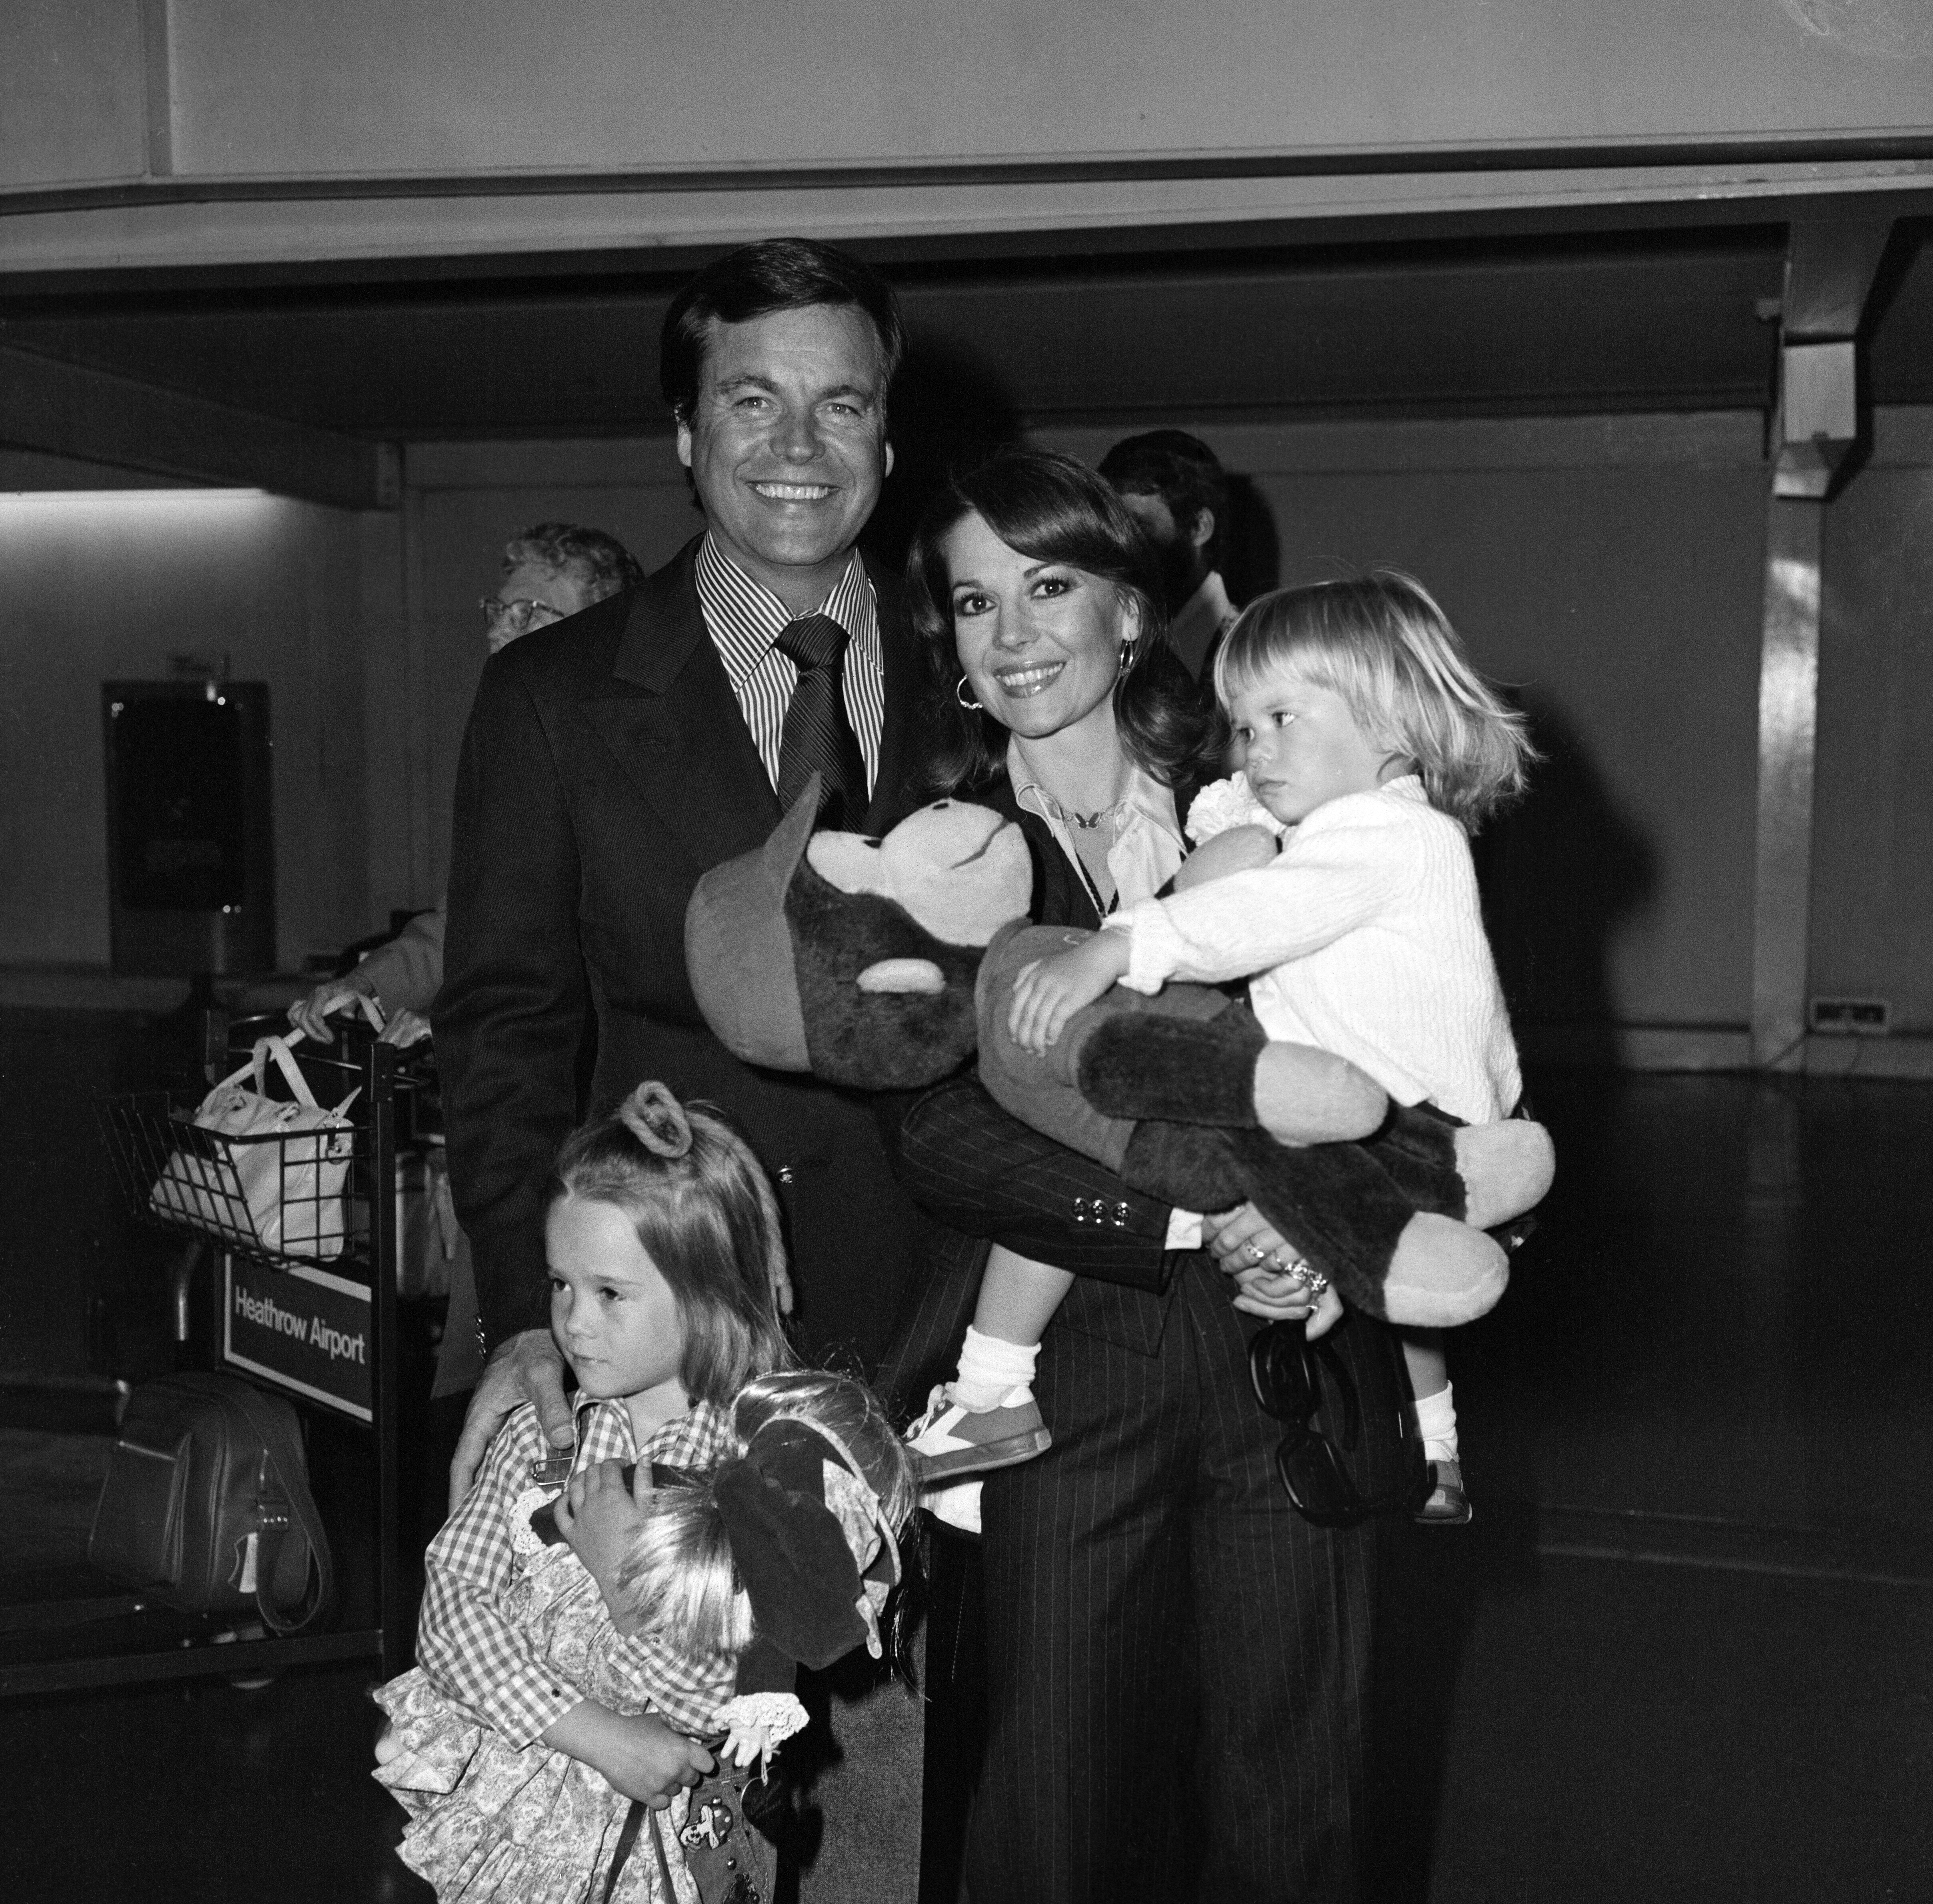 Film actor Robert Wagner and his wife Natalie Wood arrived at Heathrow Airport from Los Angeles with their children Courtney (2) and Natasha (5) in May 1976 | Source: Getty Images